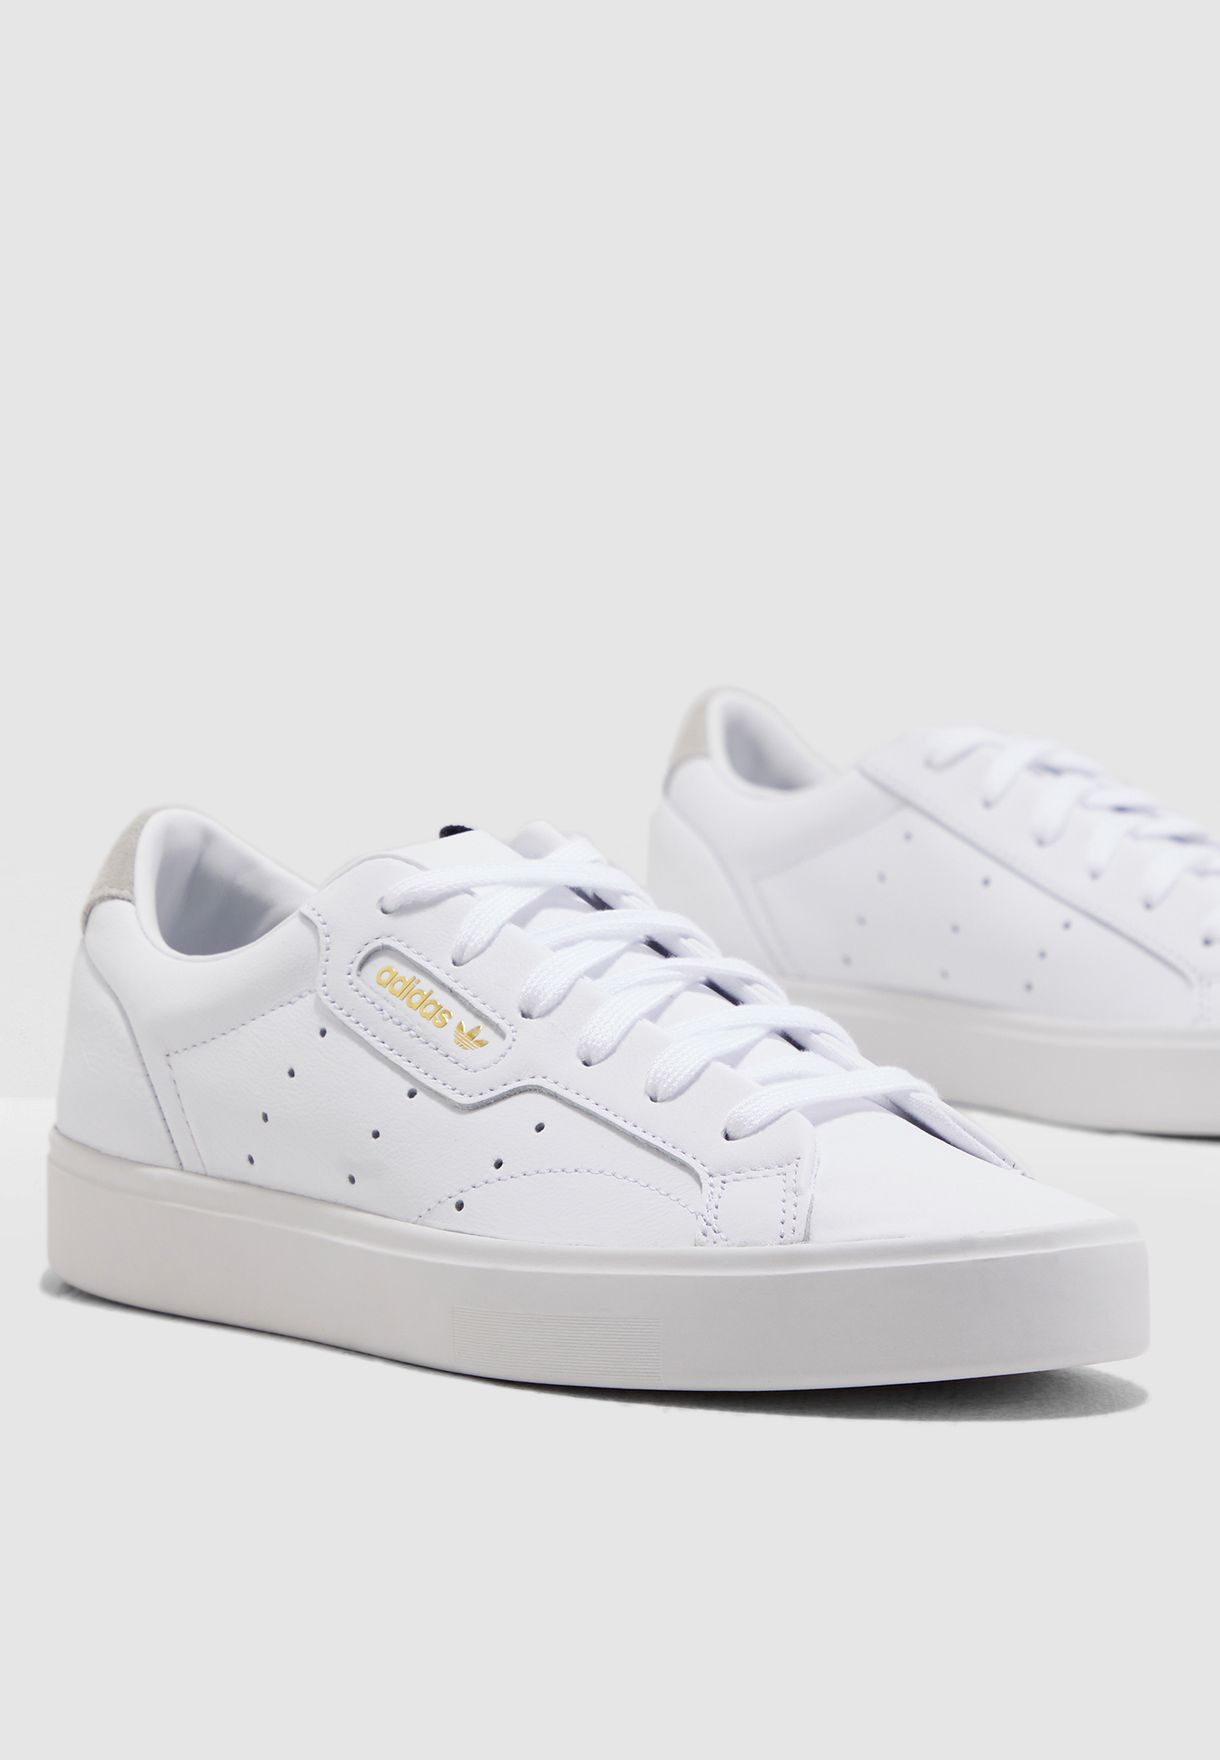 adidas classic white sneakers